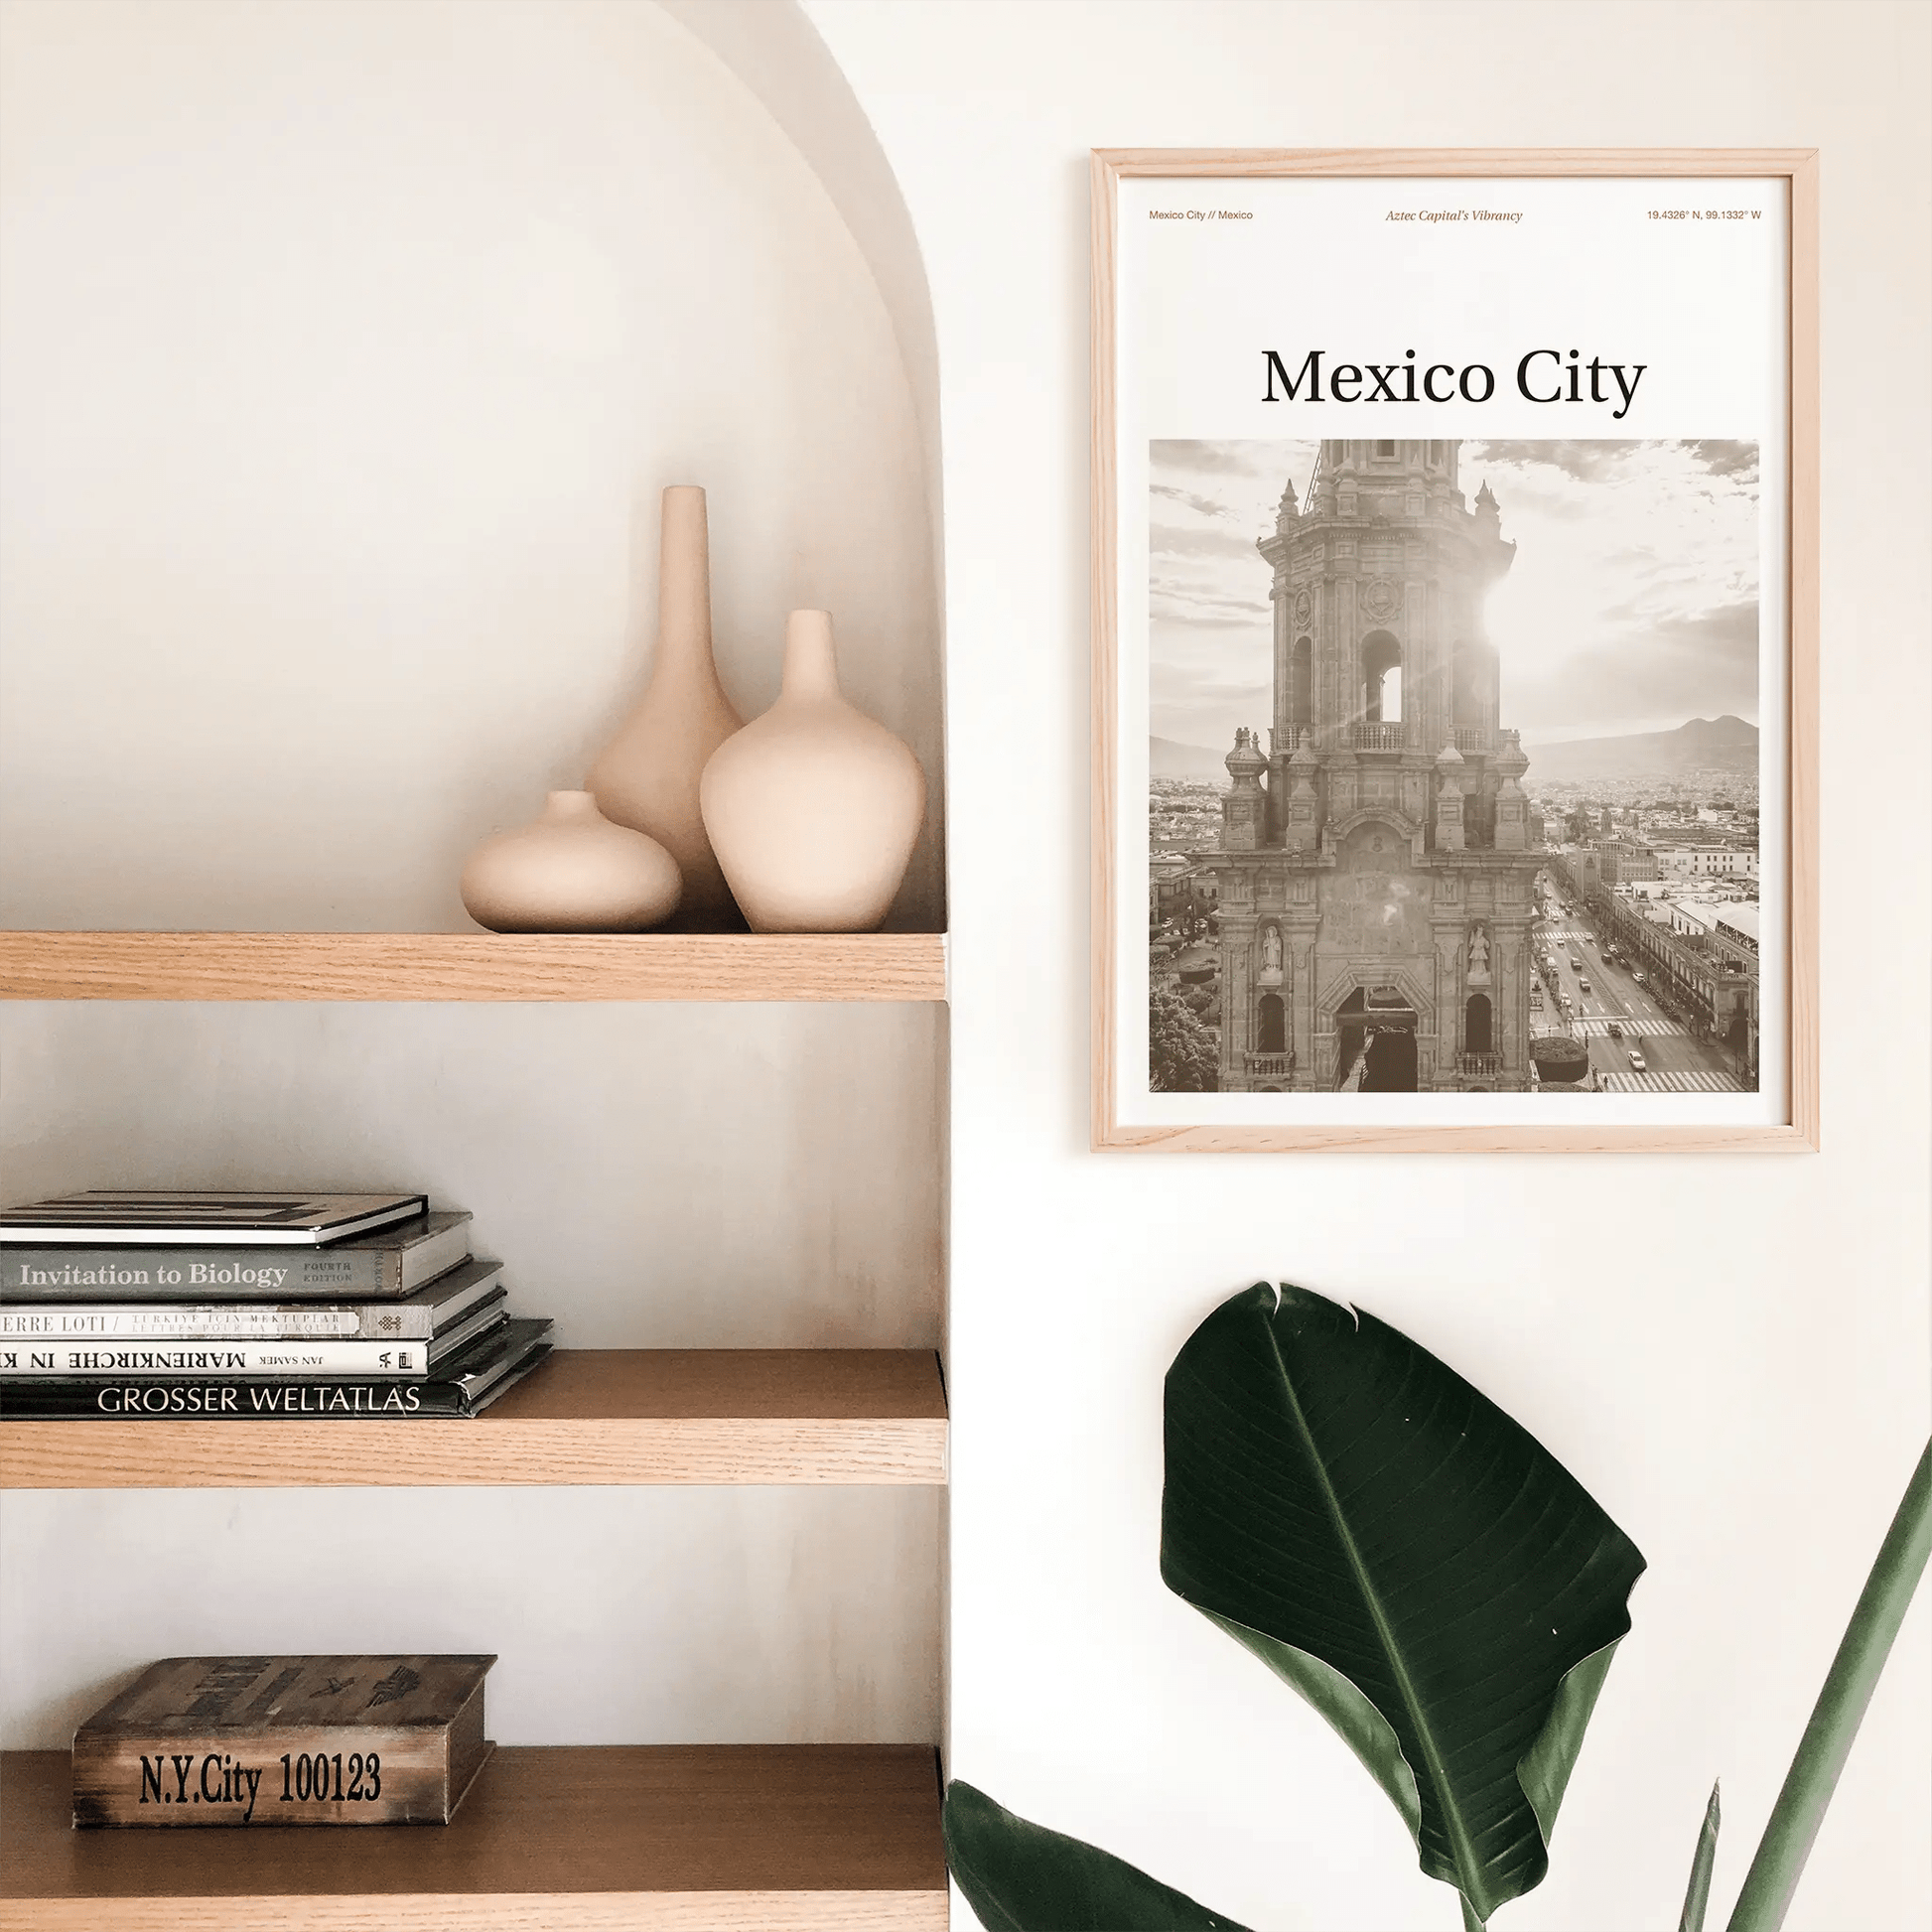 Mexico City Essence Poster - The Globe Gallery